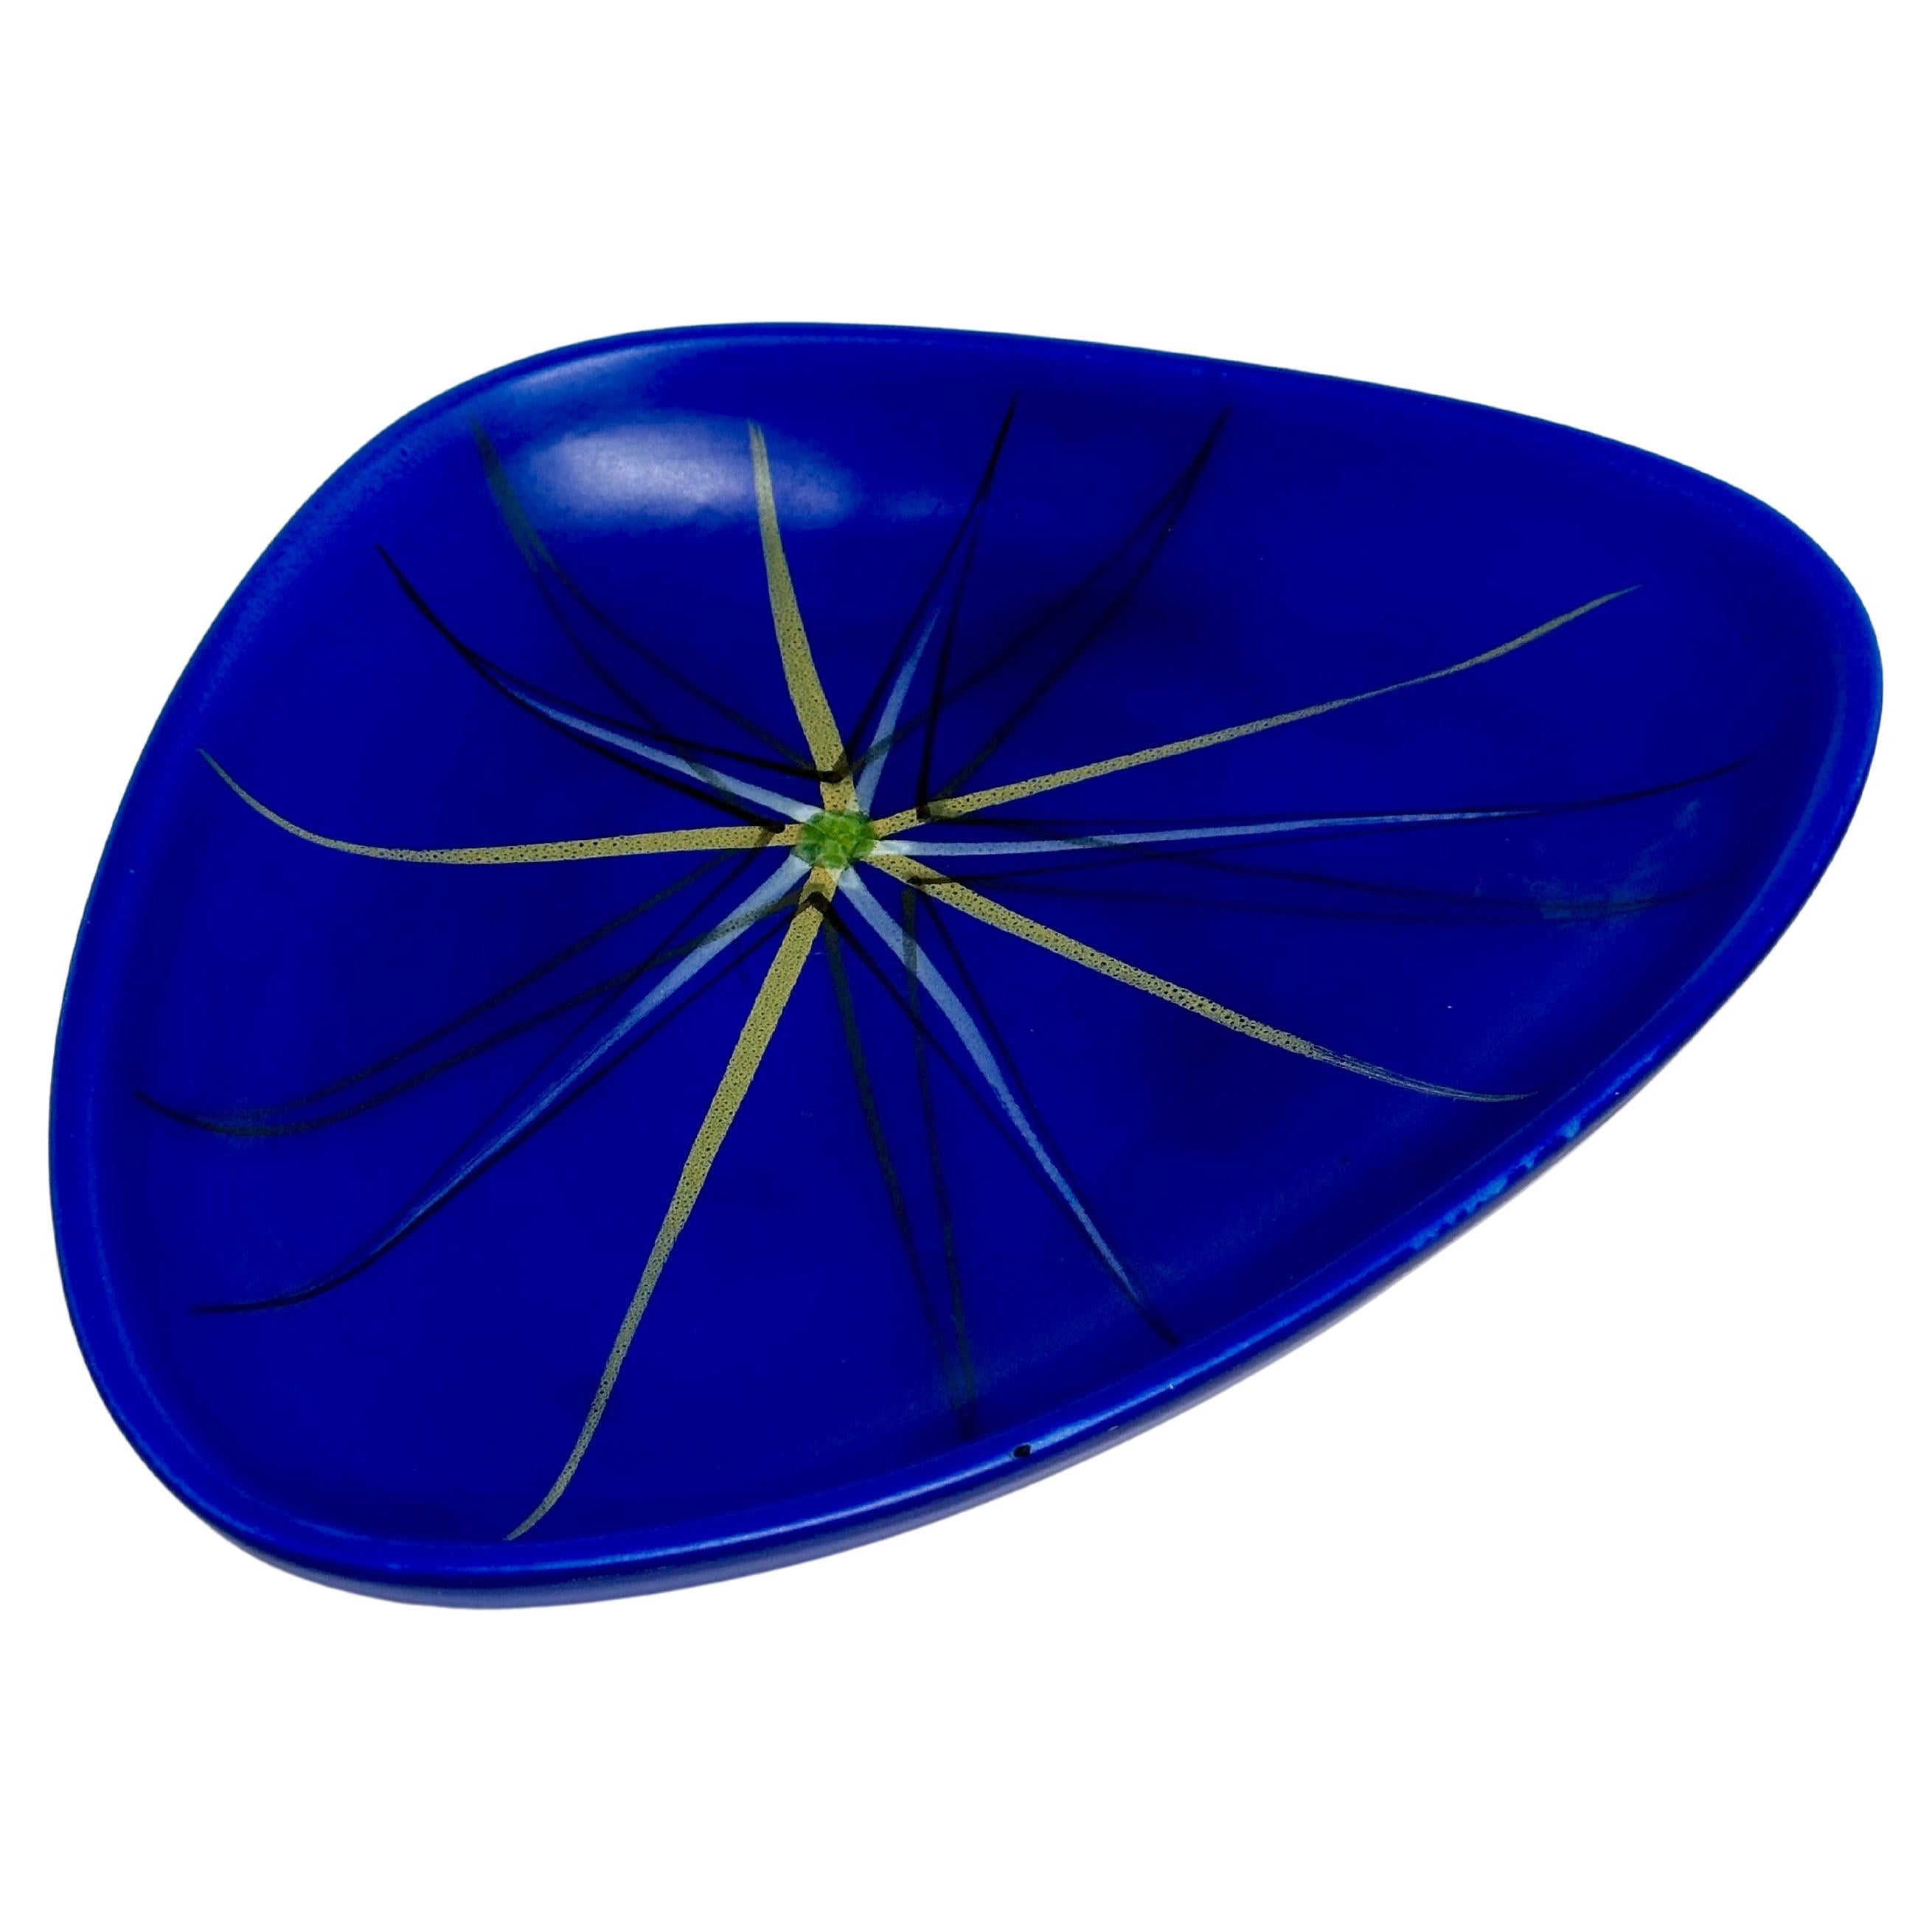 Large Free-Form Decorative Bowl, Andre Baud, Vallauris c. 1950 For Sale